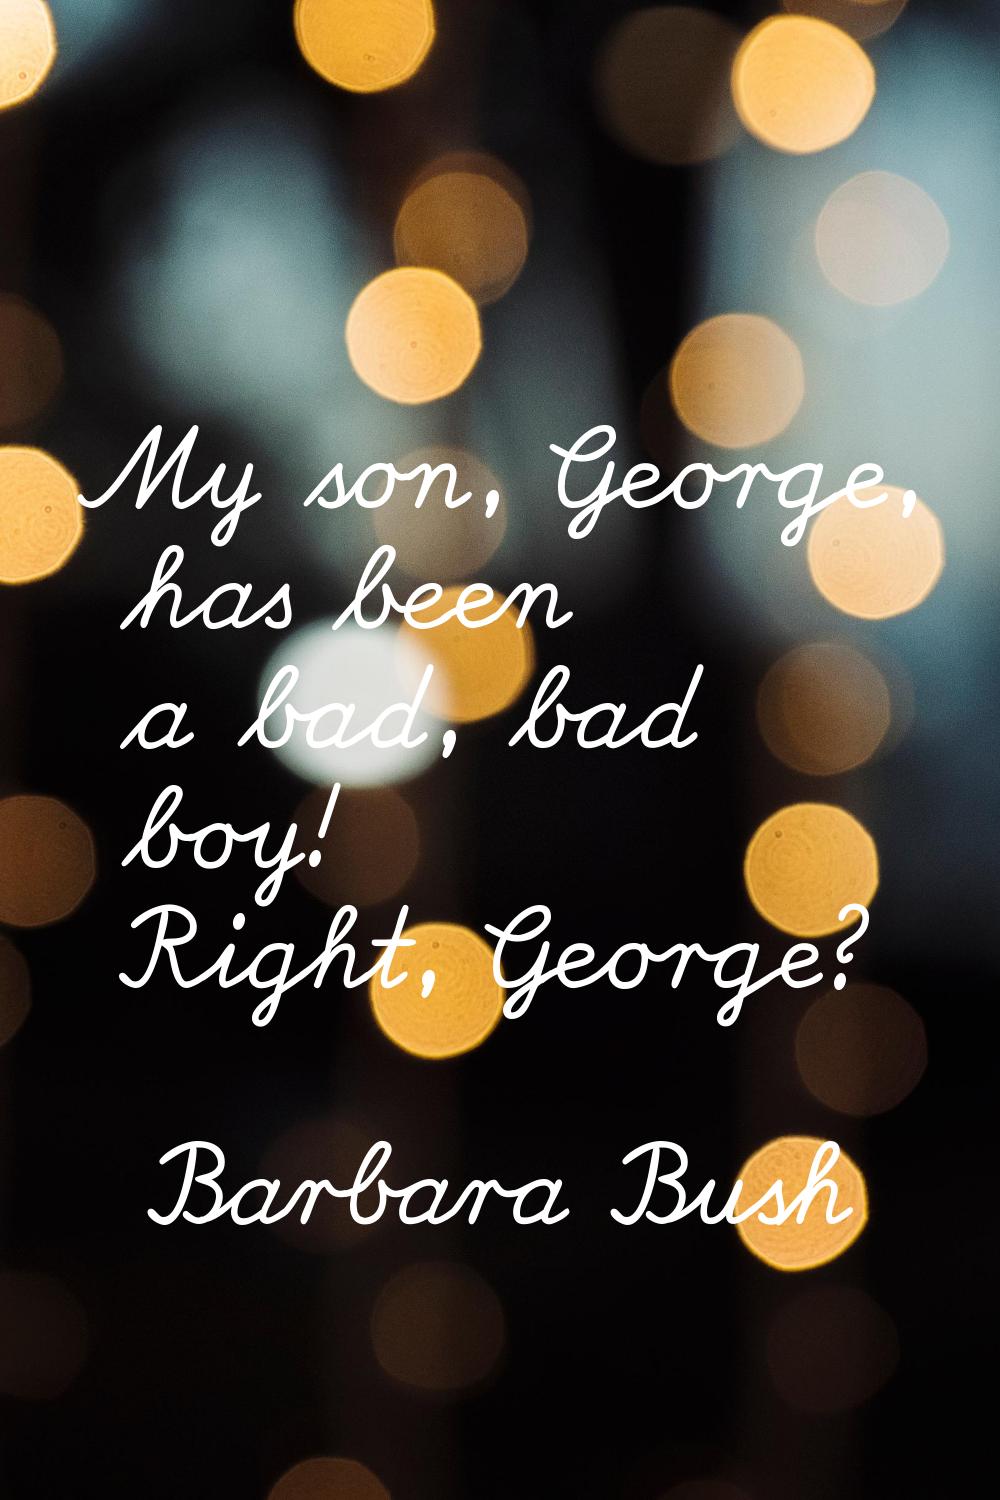 My son, George, has been a bad, bad boy! Right, George?